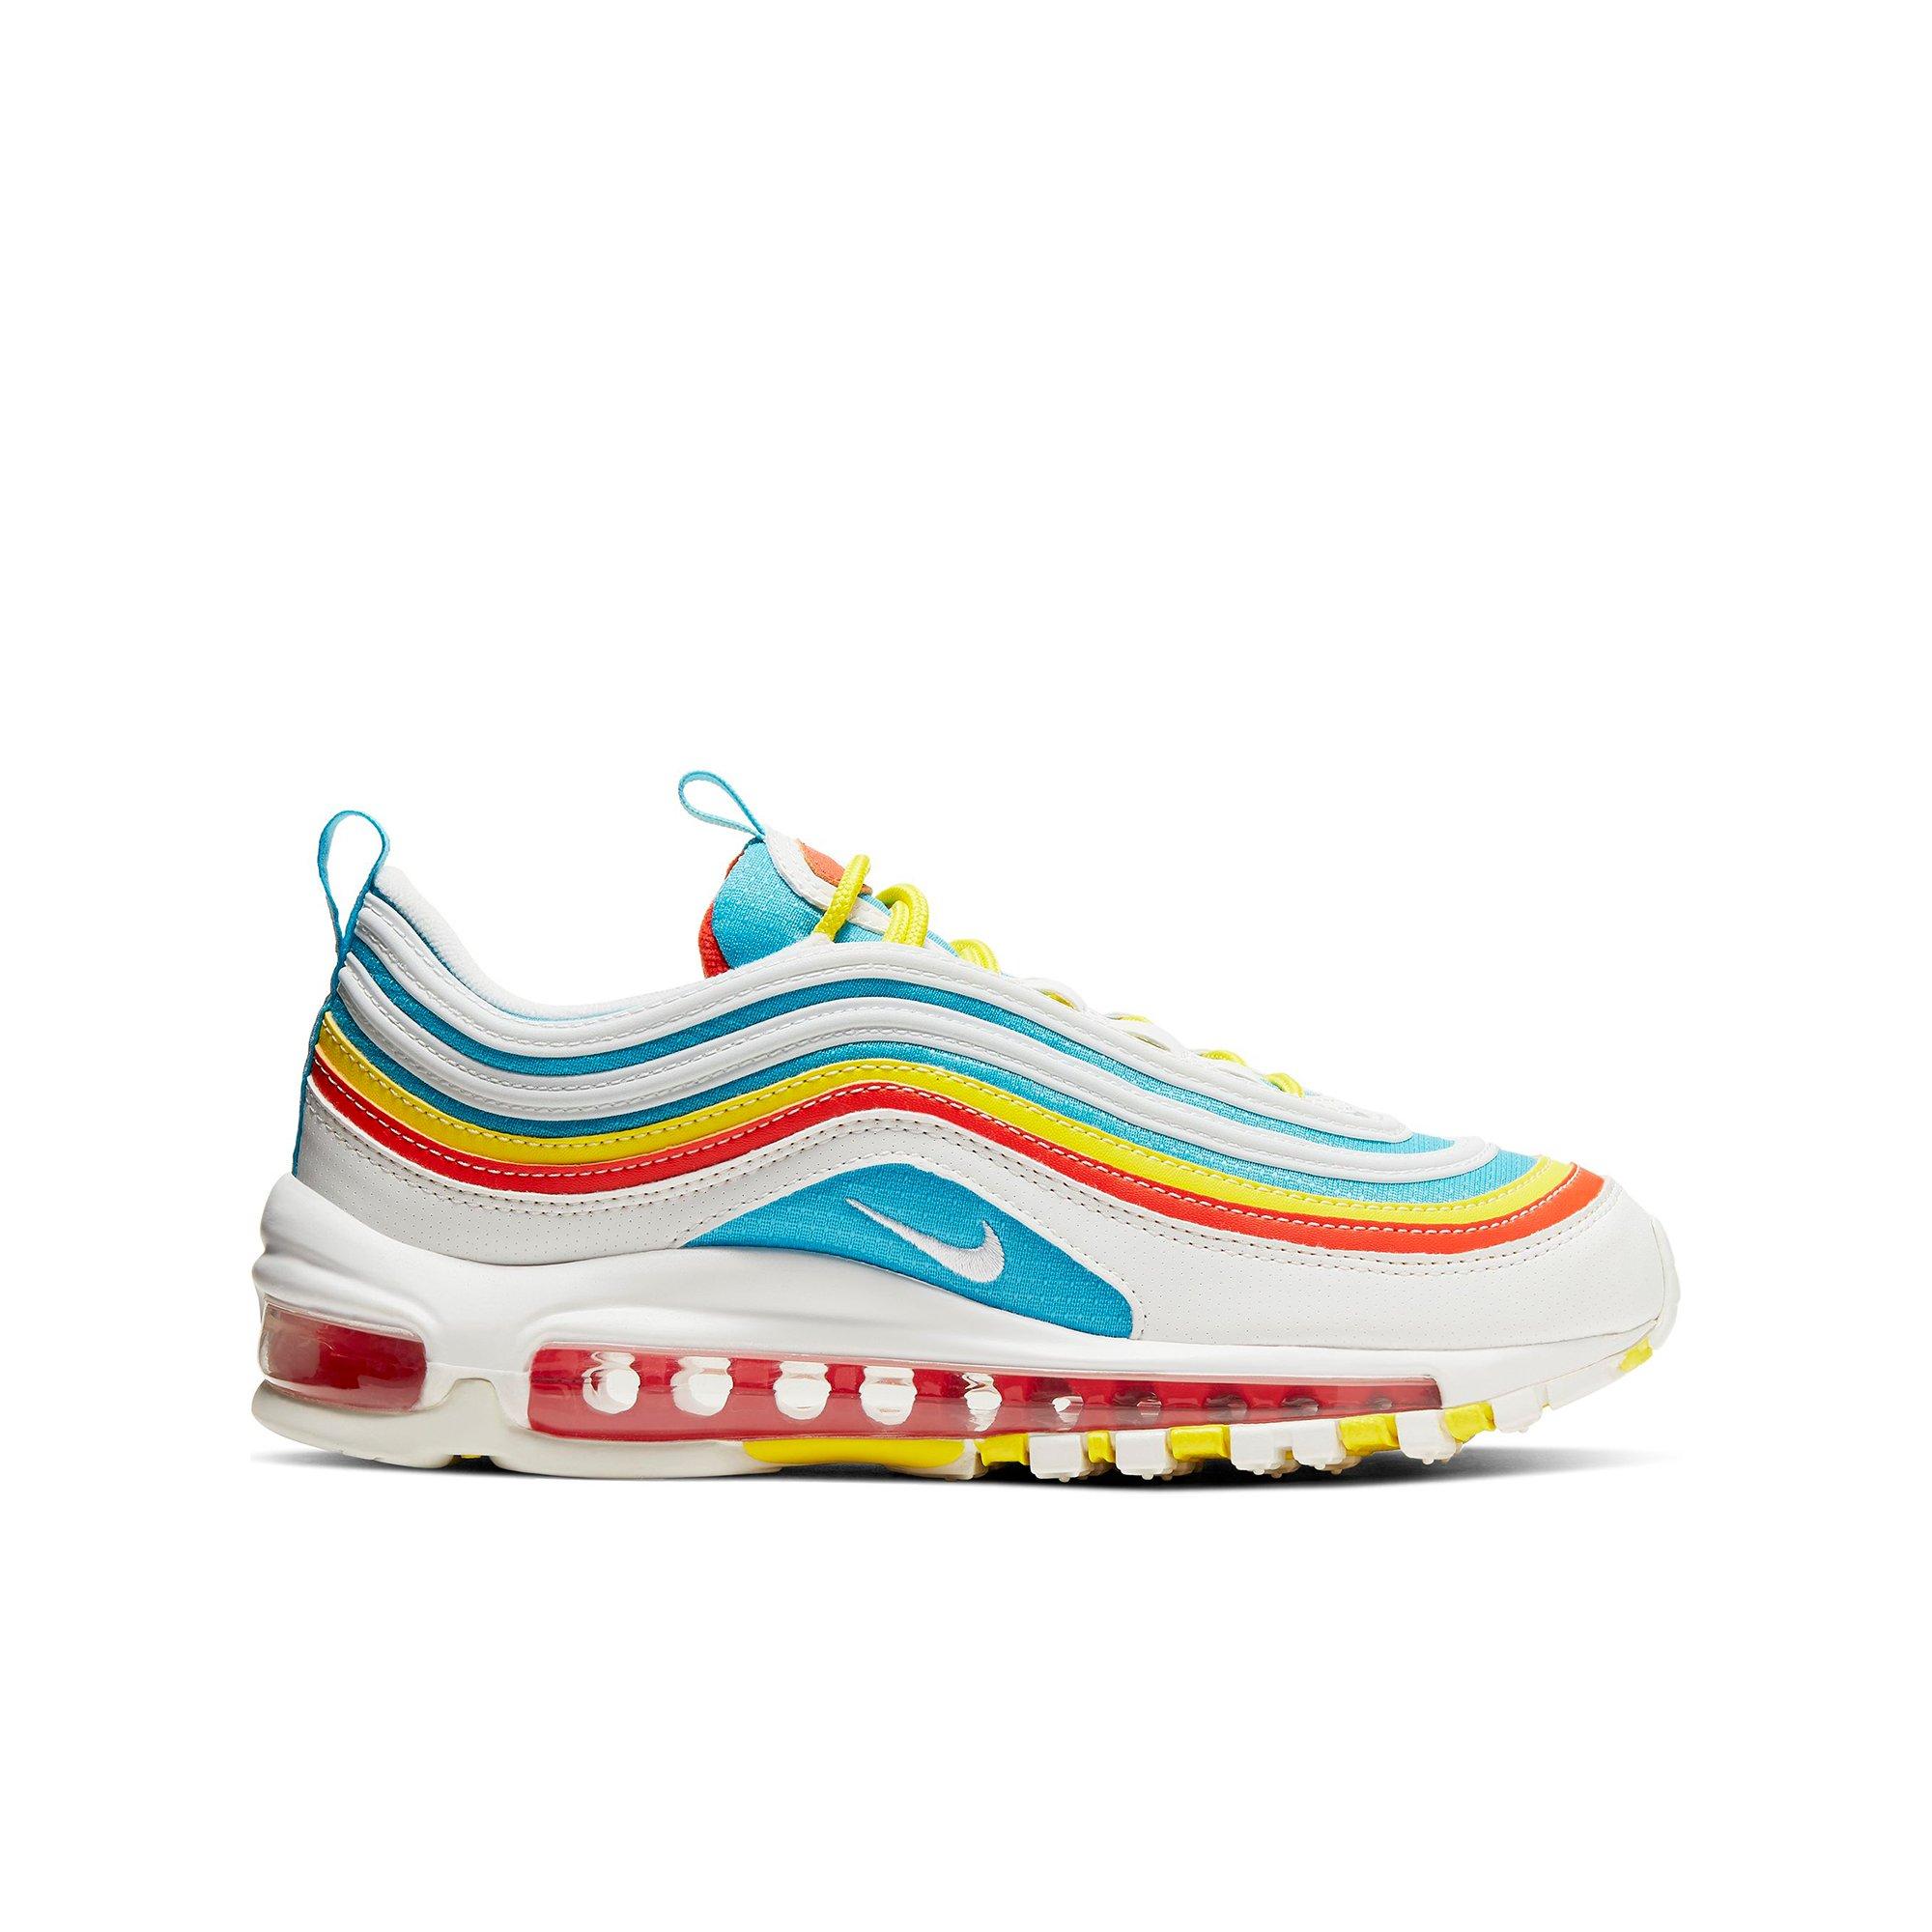 air max 97 blue yellow red